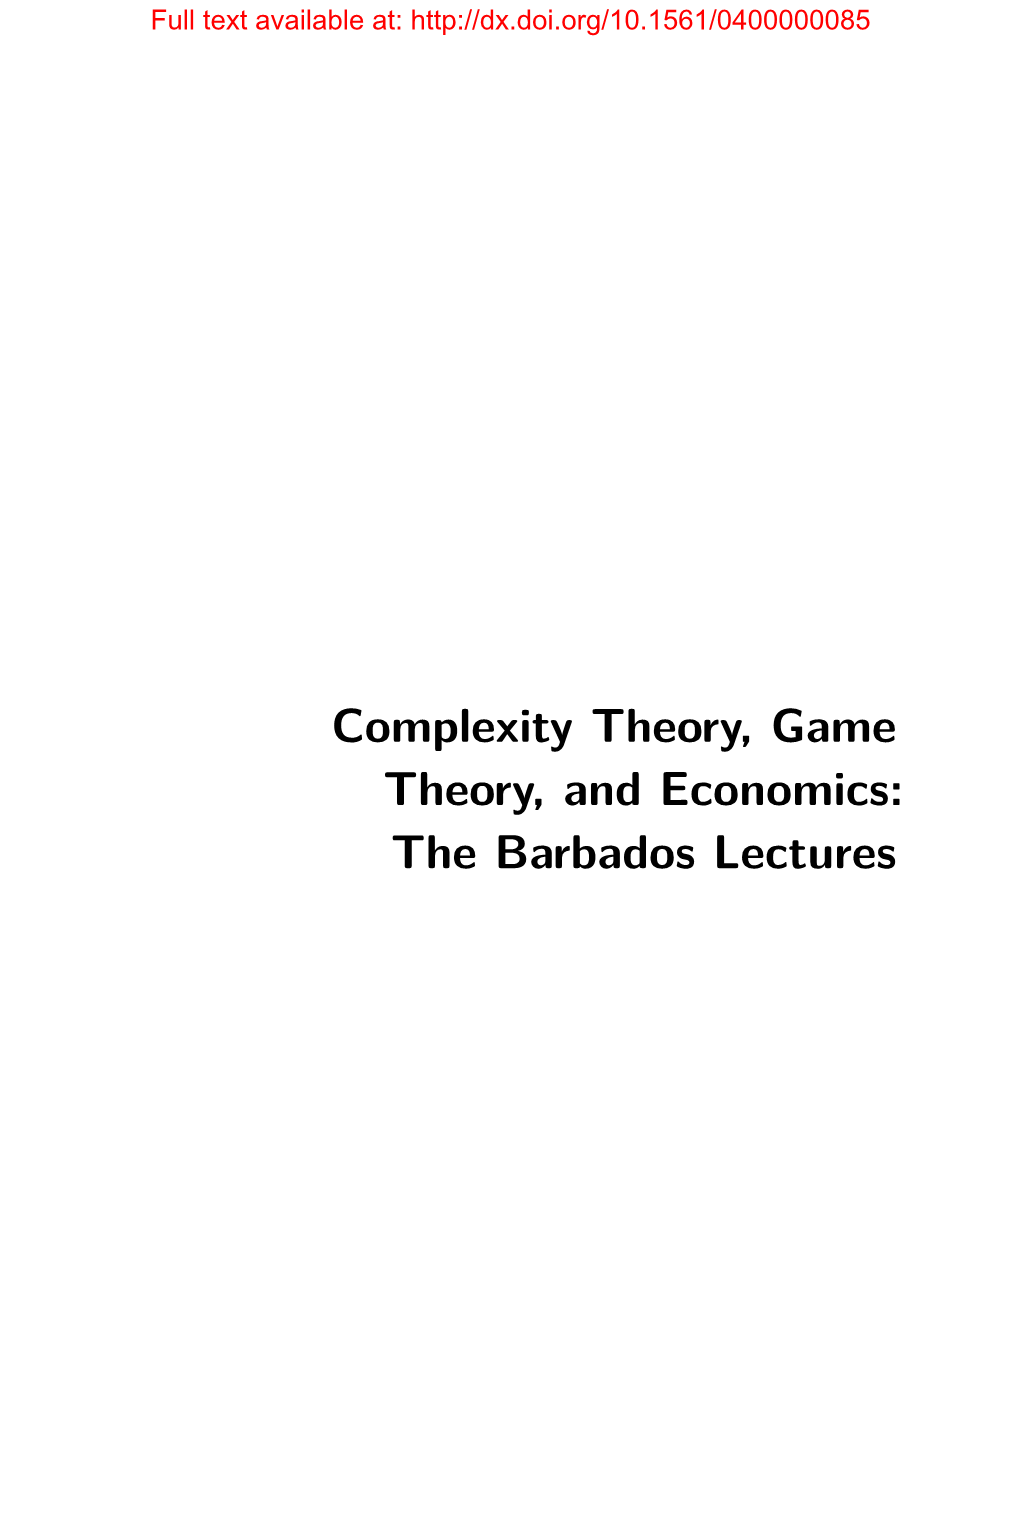 Complexity Theory, Game Theory, and Economics: the Barbados Lectures Full Text Available At